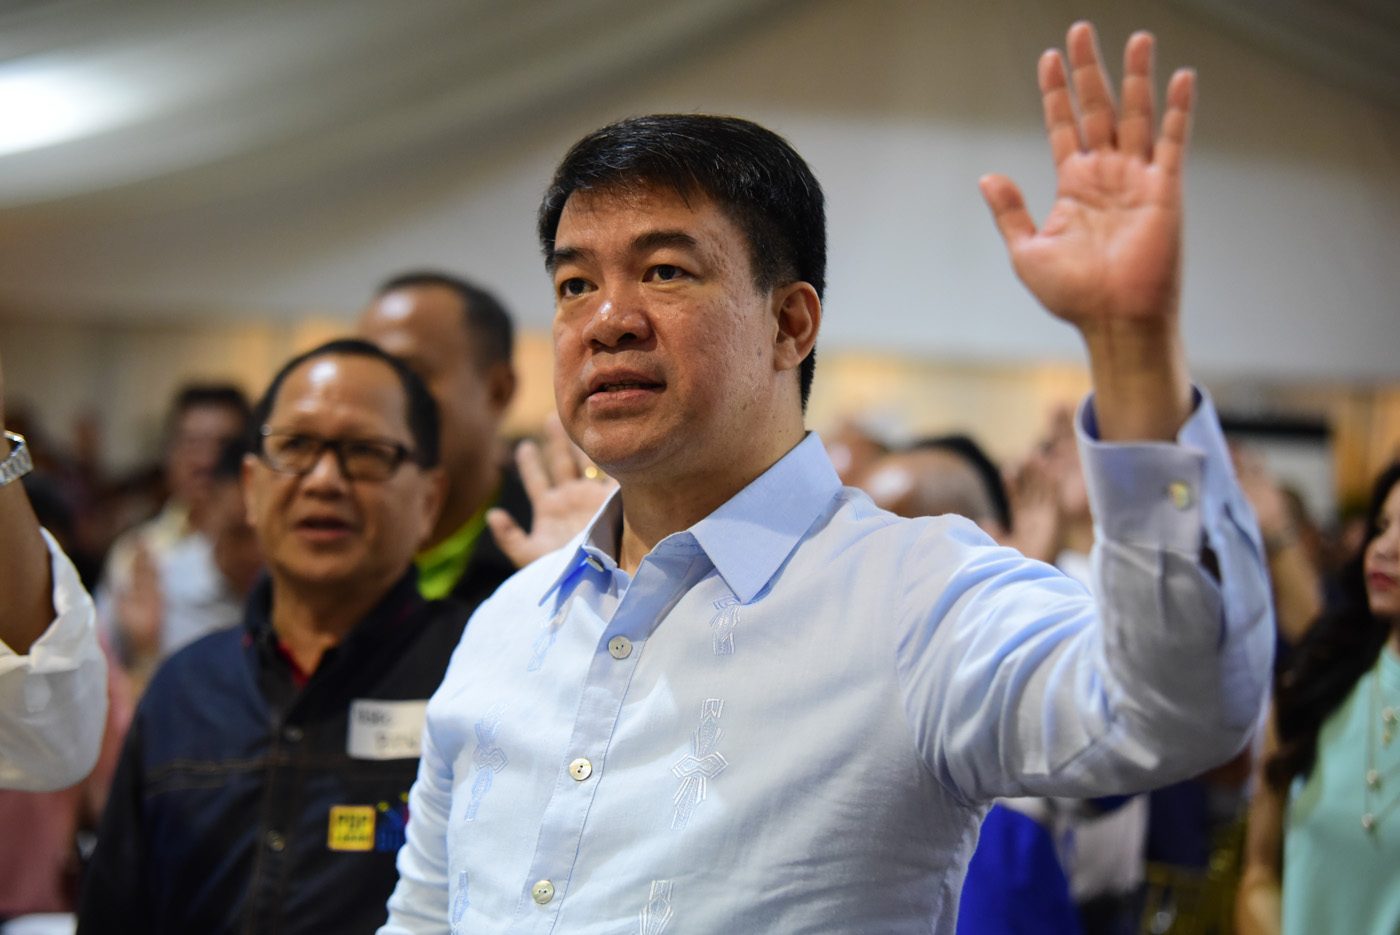 Koko Pimentel to seek reelection in 2019 amid legal issues